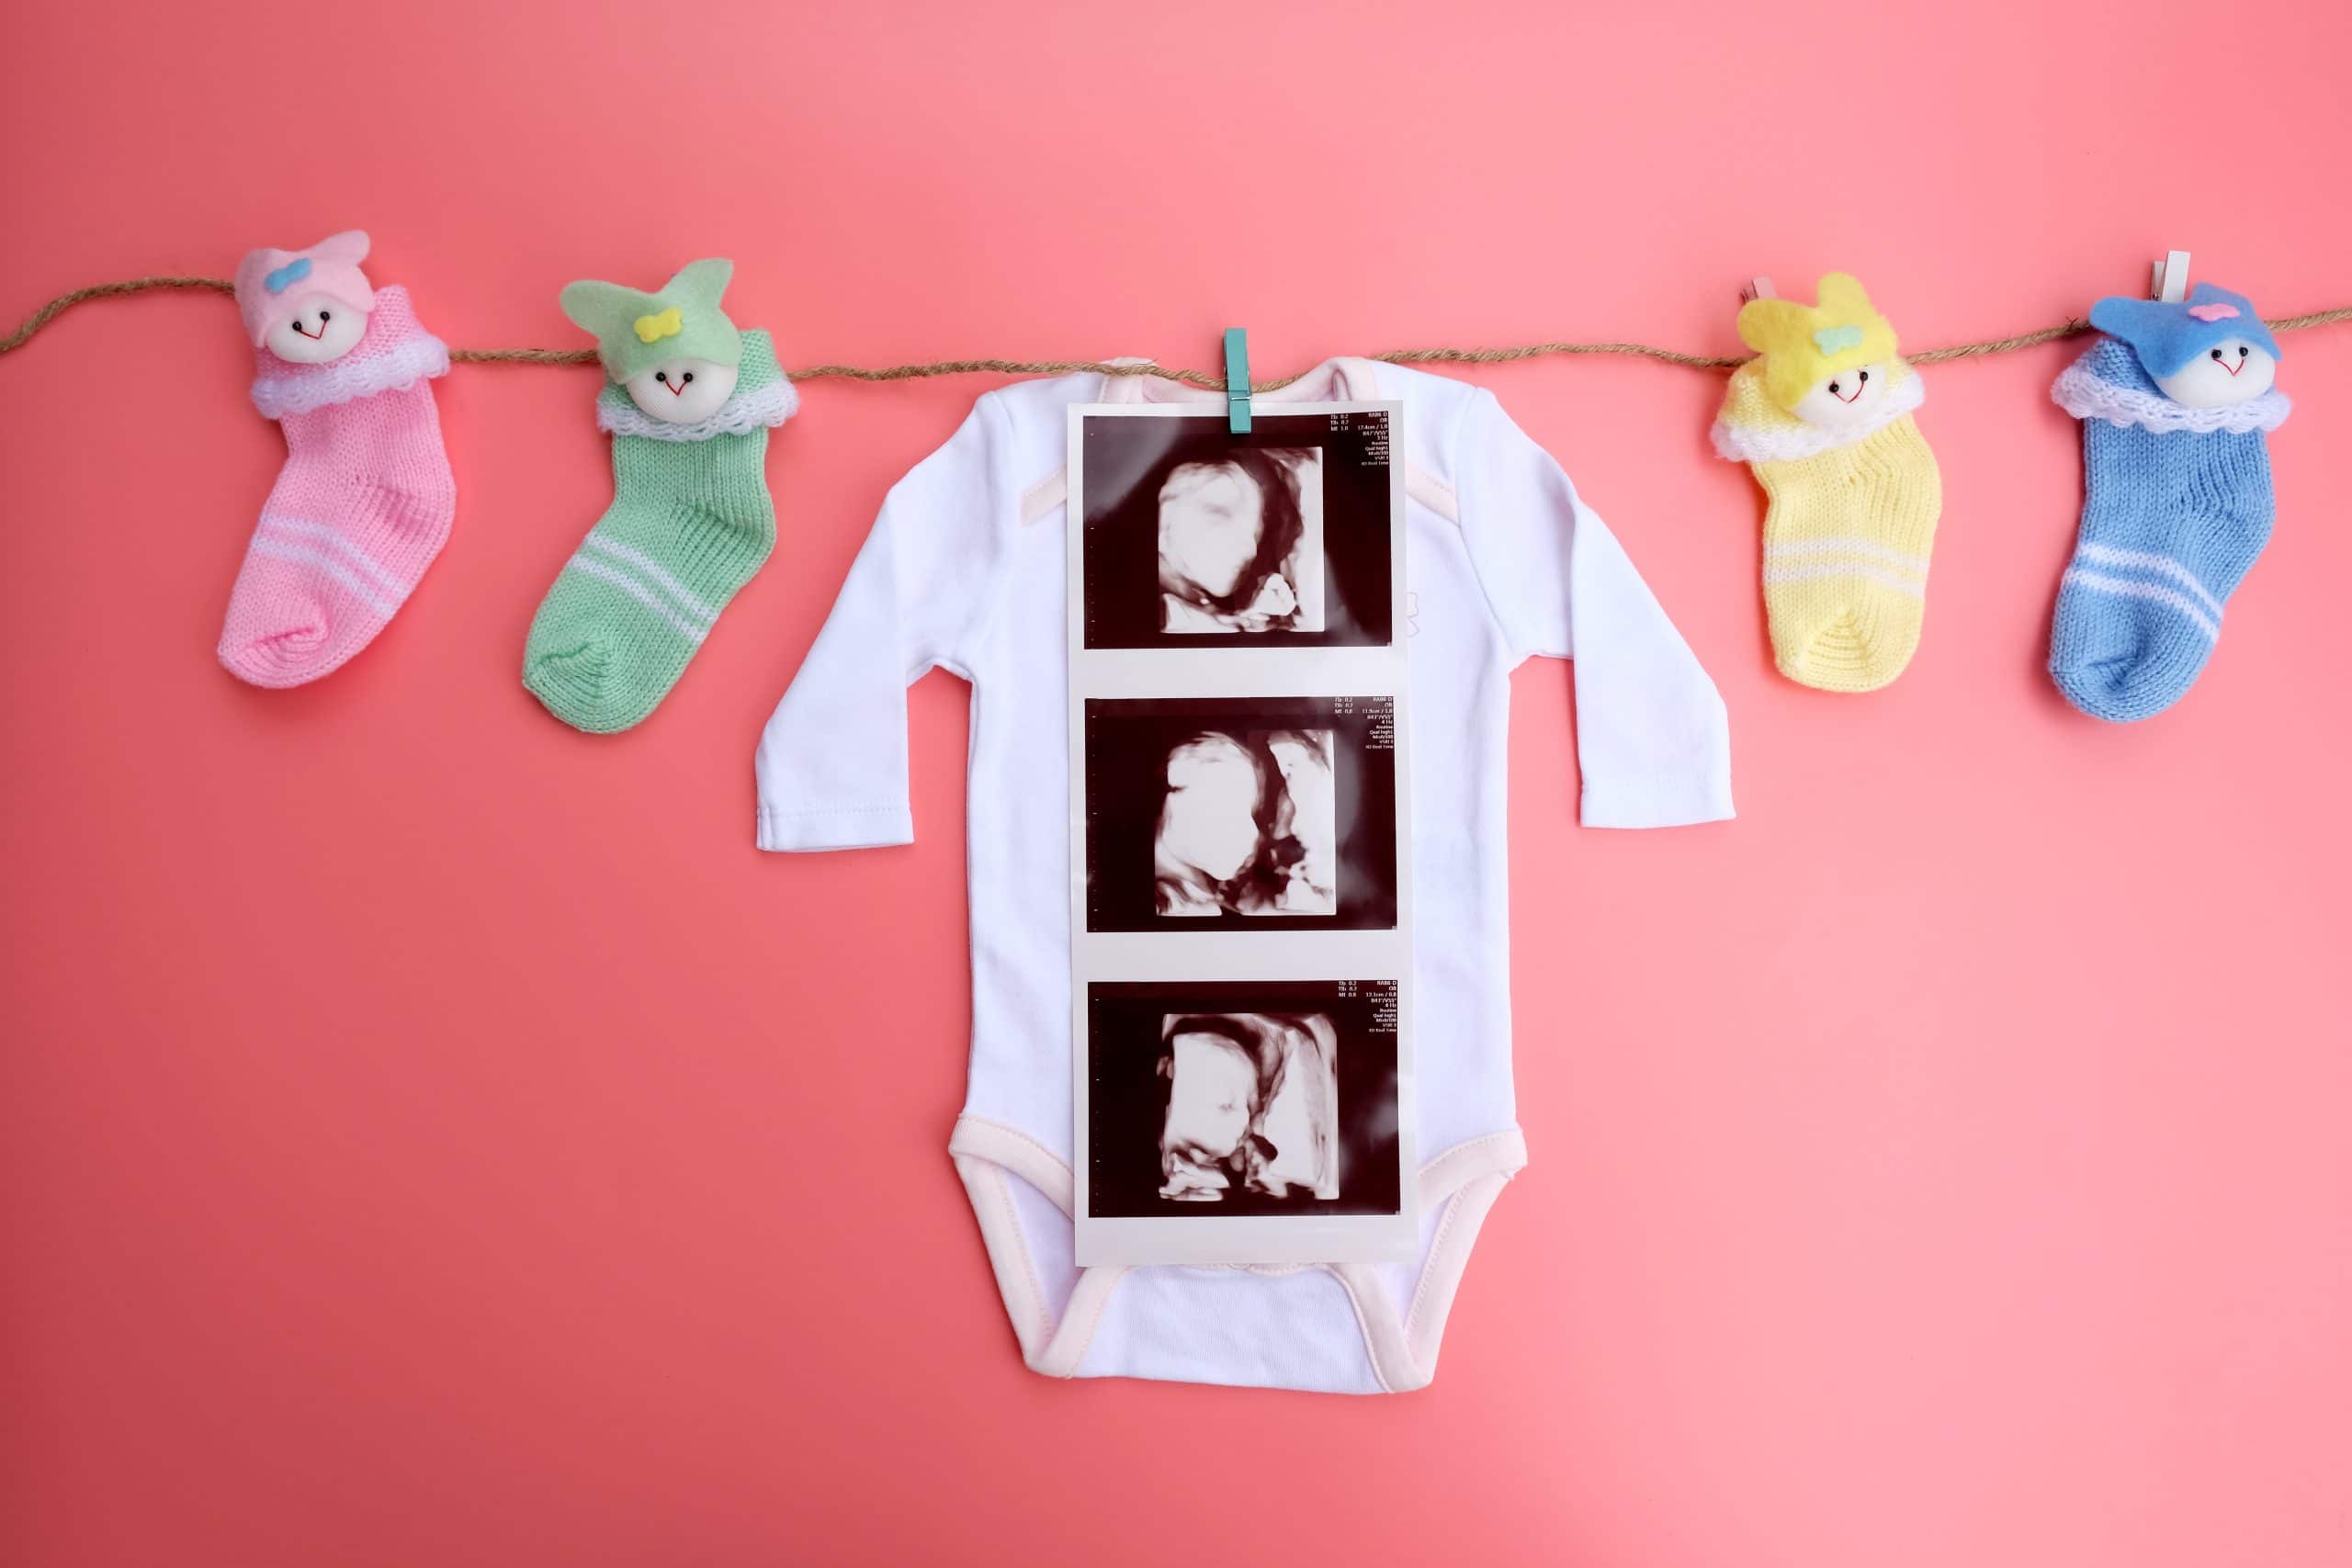 A baby onesie with a 4d ultrasound laid on top, surrounded by cute baby socks.